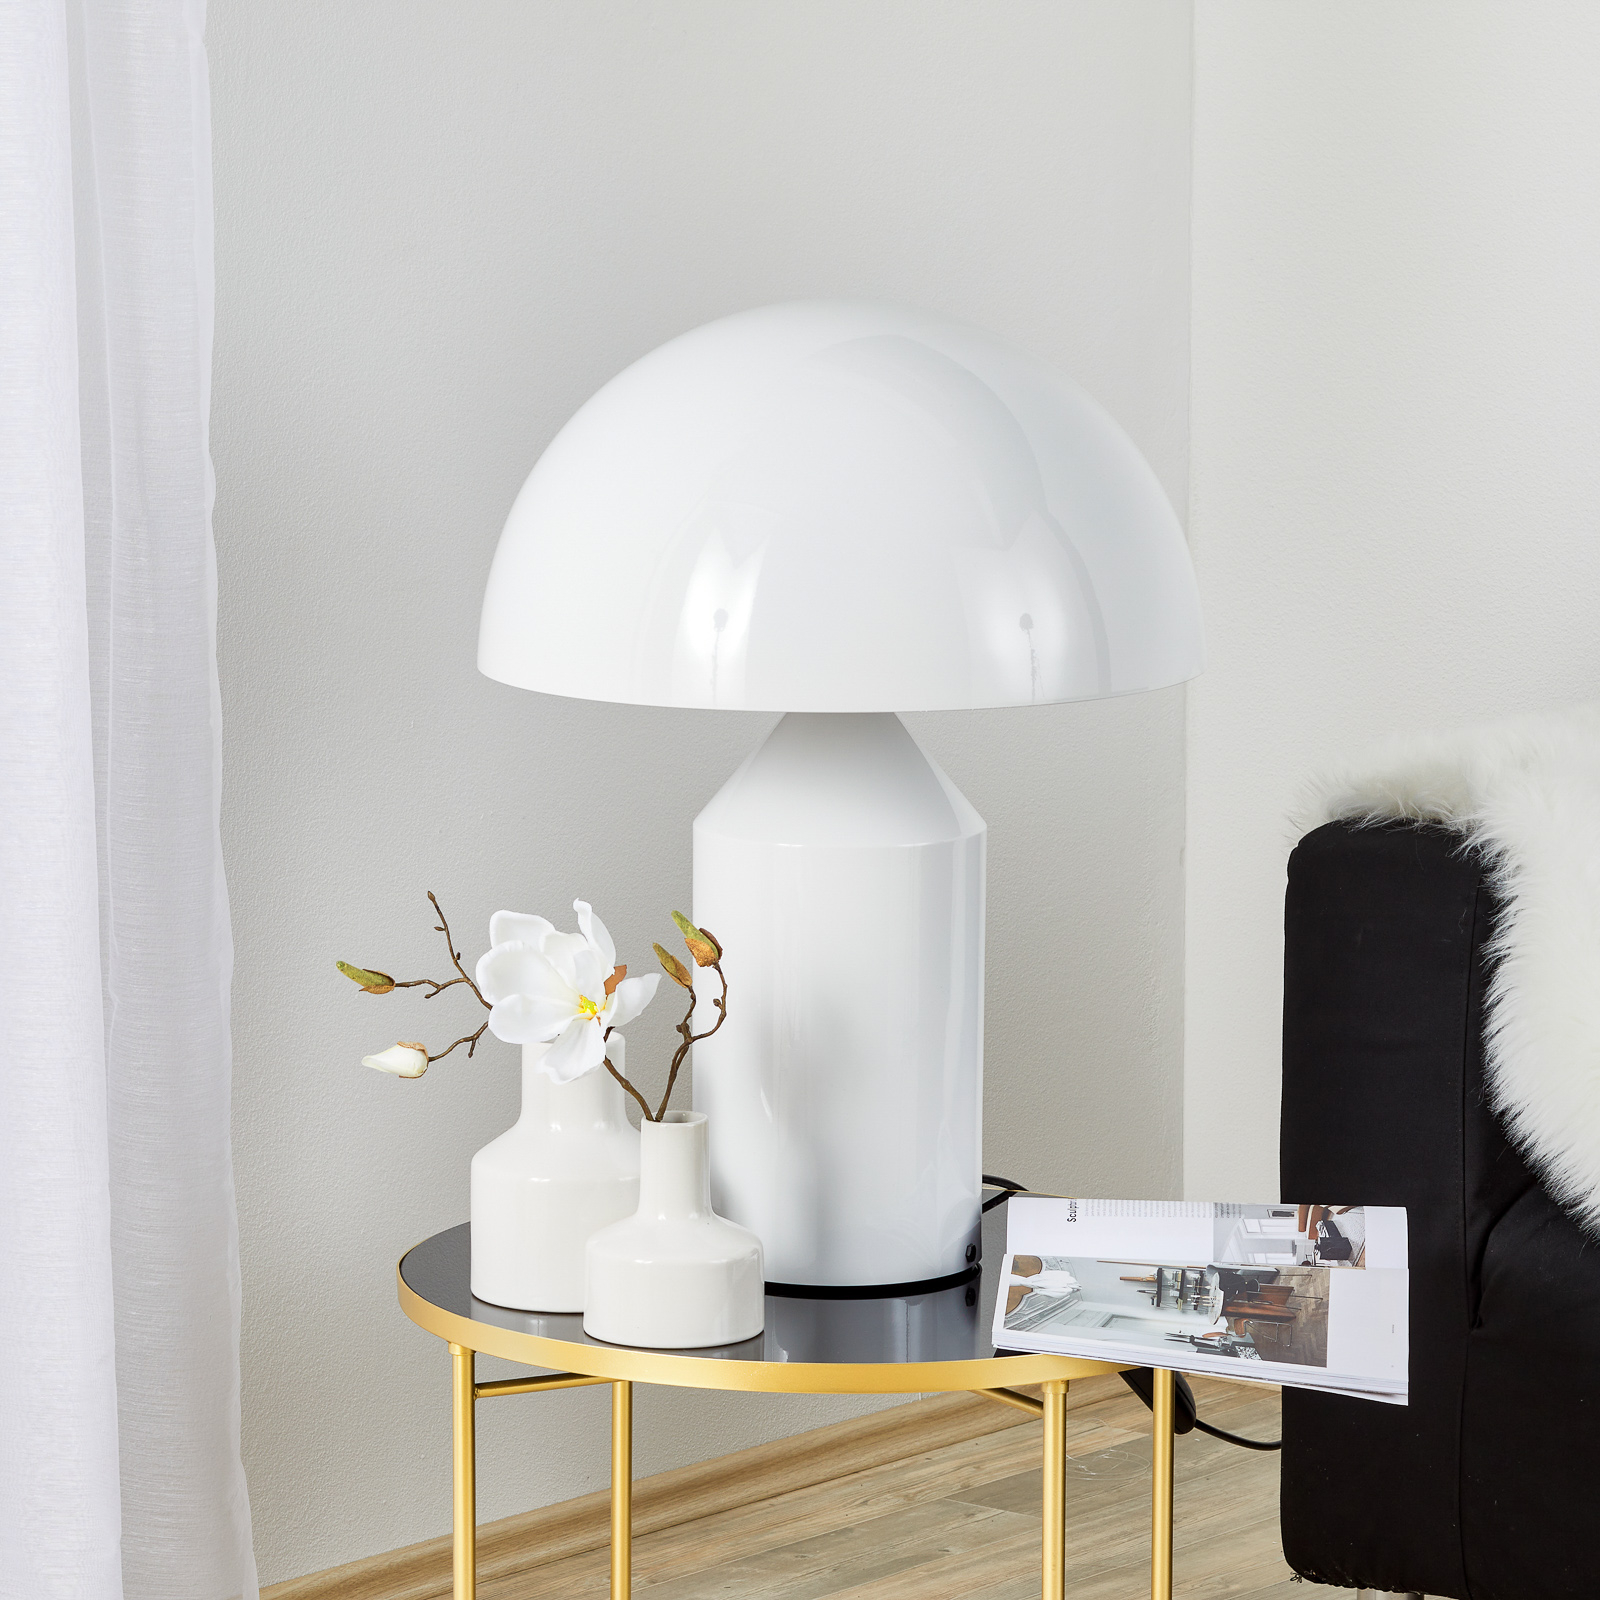 Designer table lamp Atollo with dimmer | Lights.co.uk